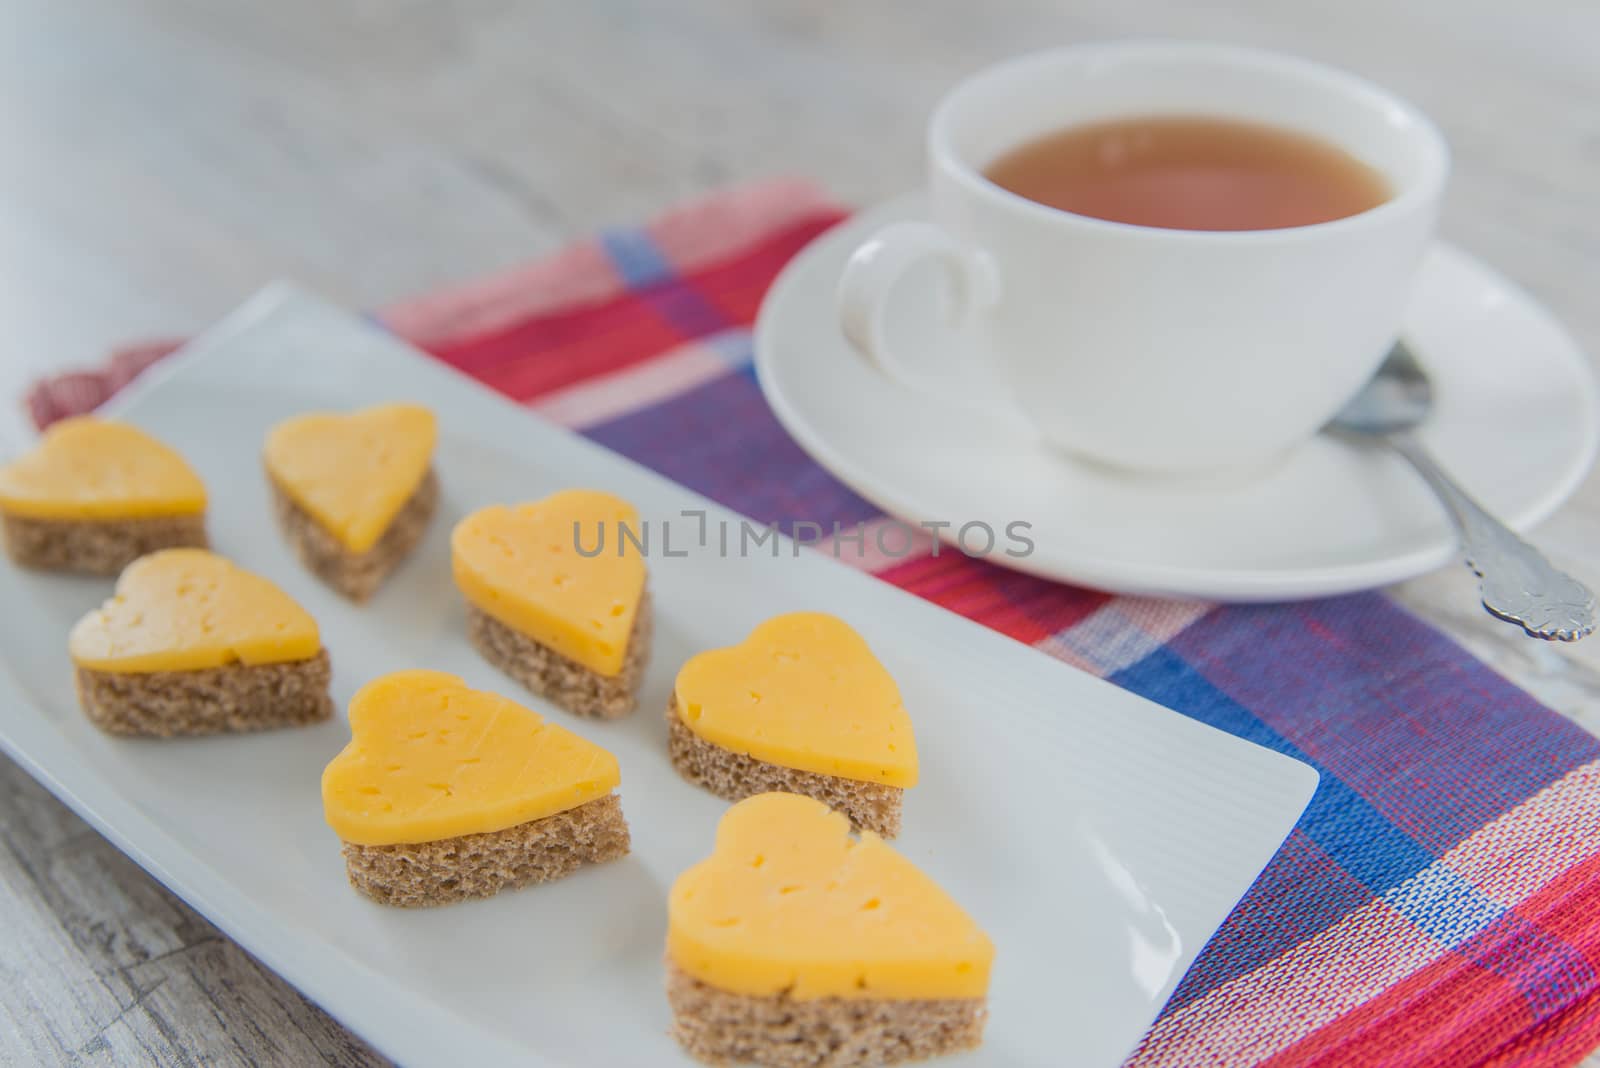 Heart shaped cheese sandwiches with tea